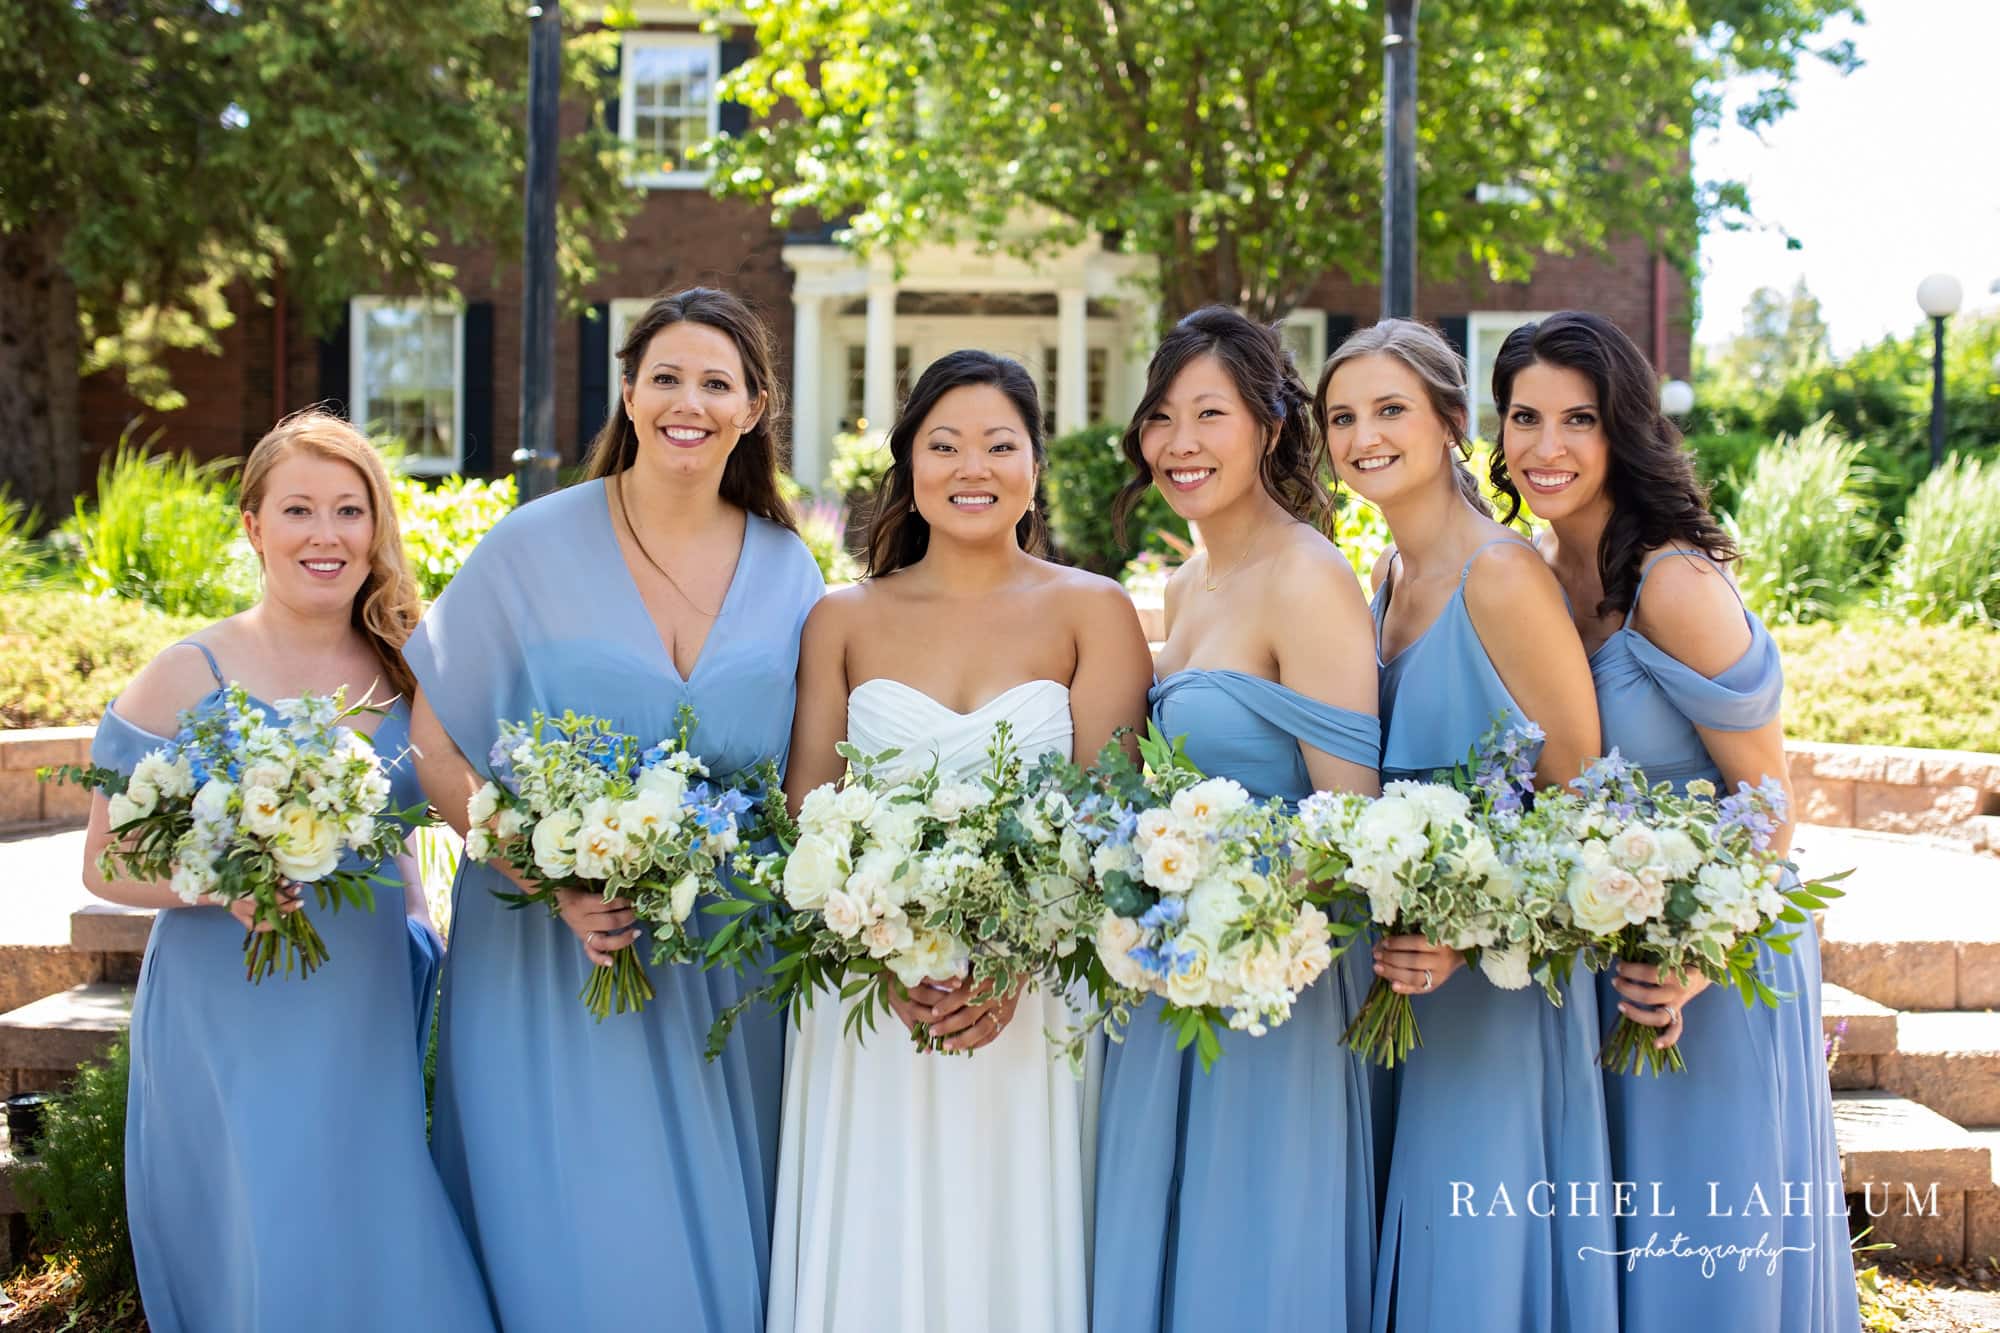 Bride and bridesmaids pose together before wedding ceremony at The Blaisdell.